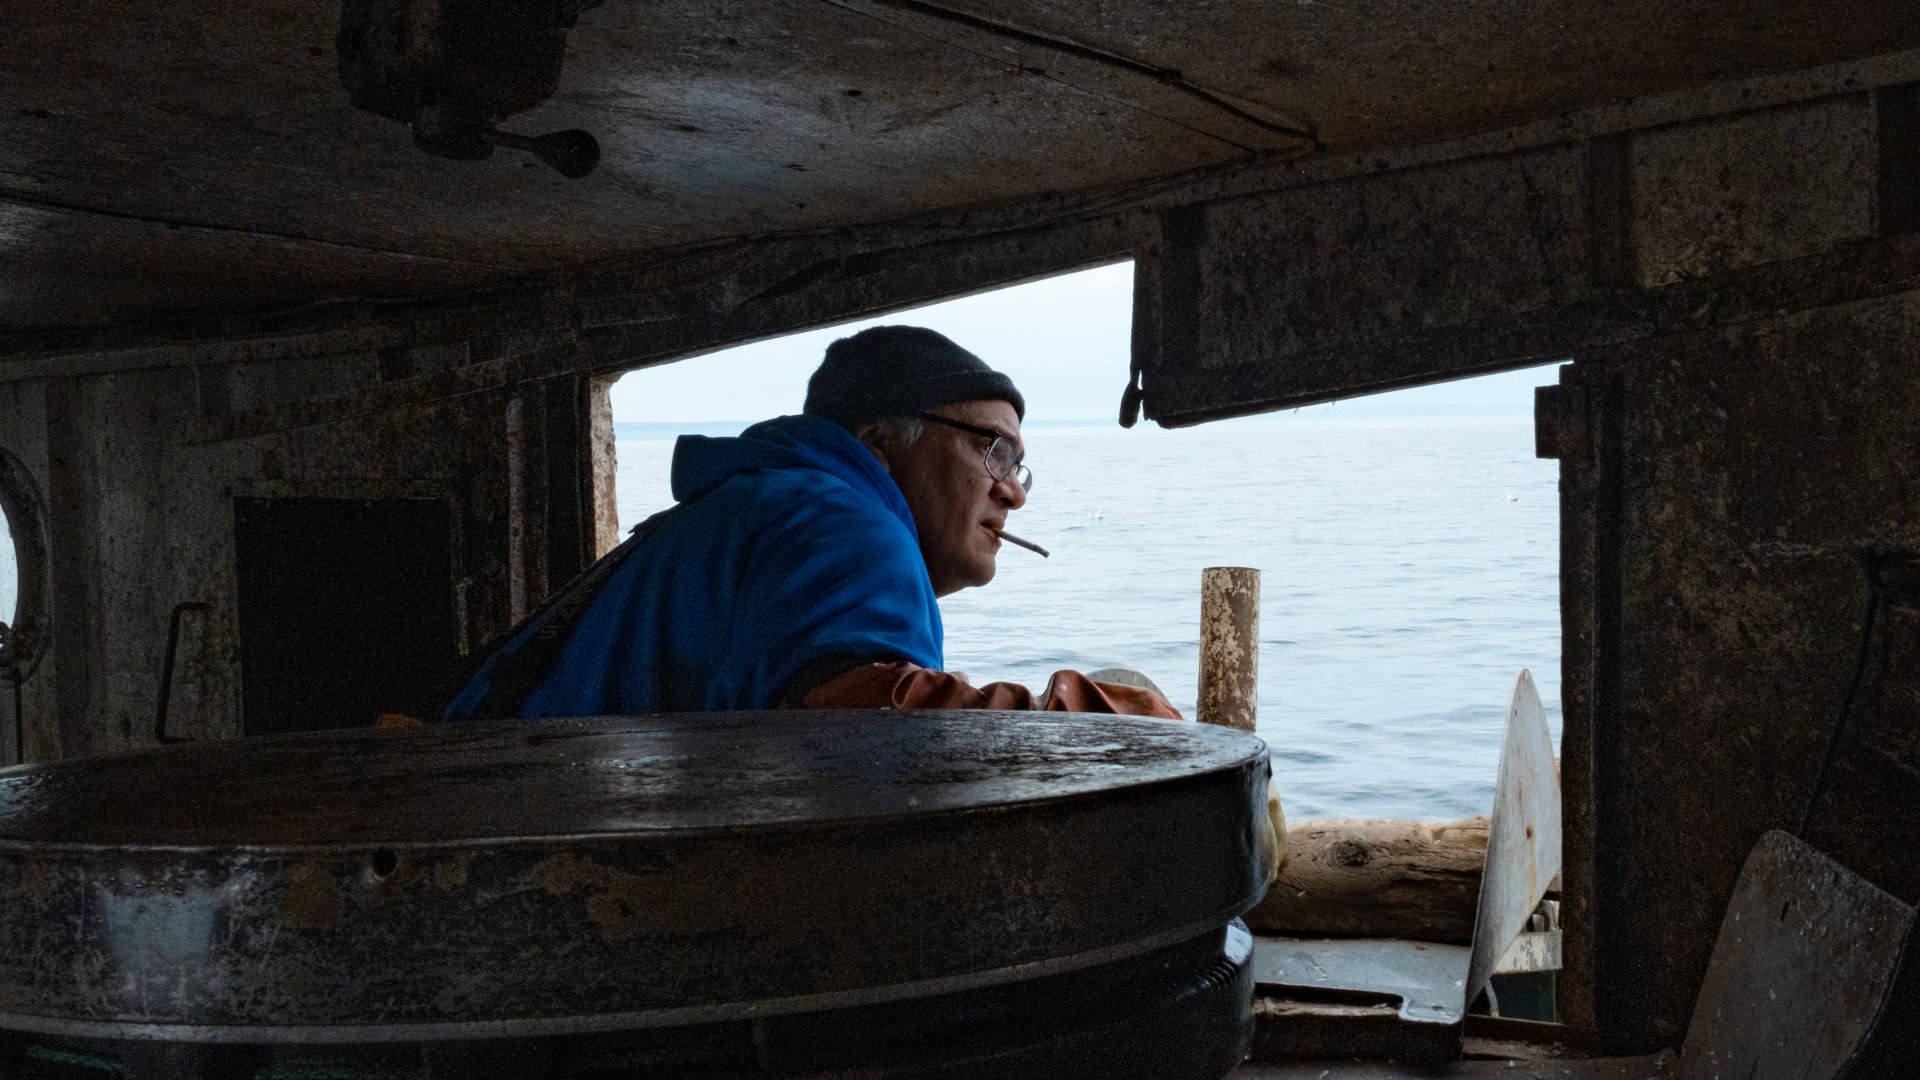 Captain Chris Peterson stands aboard the Three Suns fishing tug, peering out onto the waters of Lake Superior. Peterson and his deckhand Richard Bruneau fish on the west side of the Keweenaw Peninsula, in a remote part of Michigan’s Upper Peninsula.